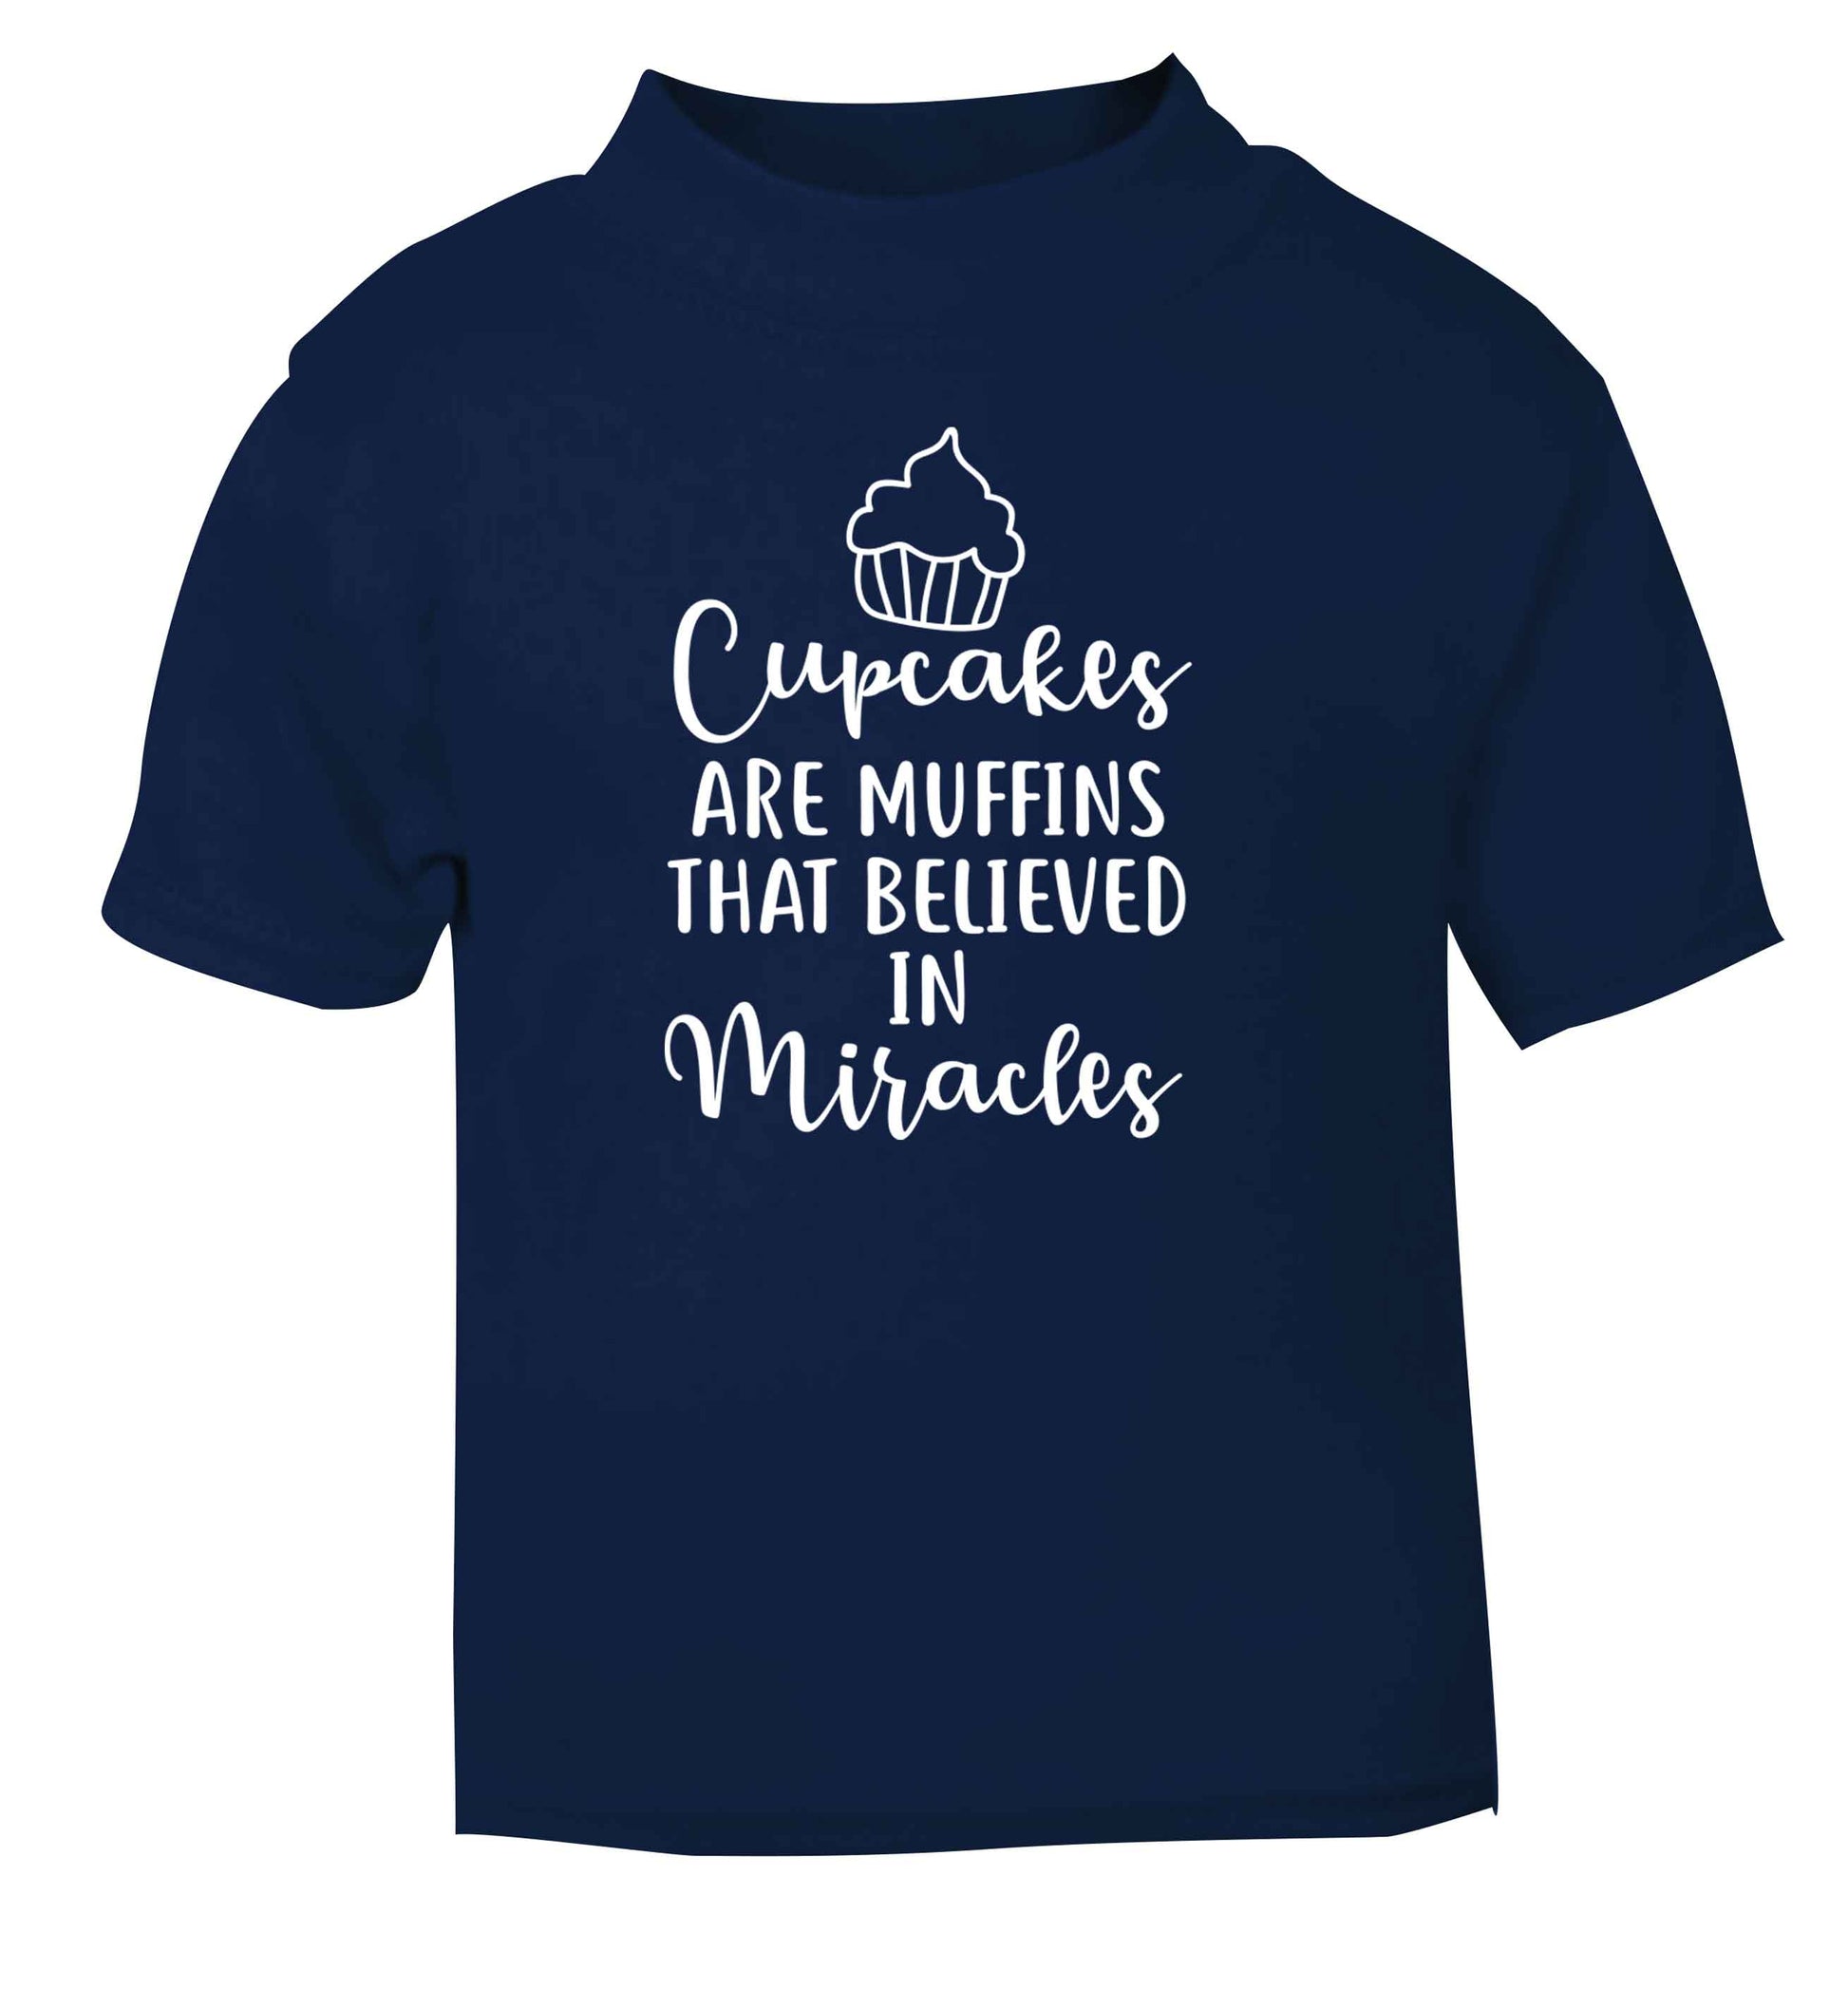 Cupcakes muffins that believed in miracles navy Baby Toddler Tshirt 2 Years